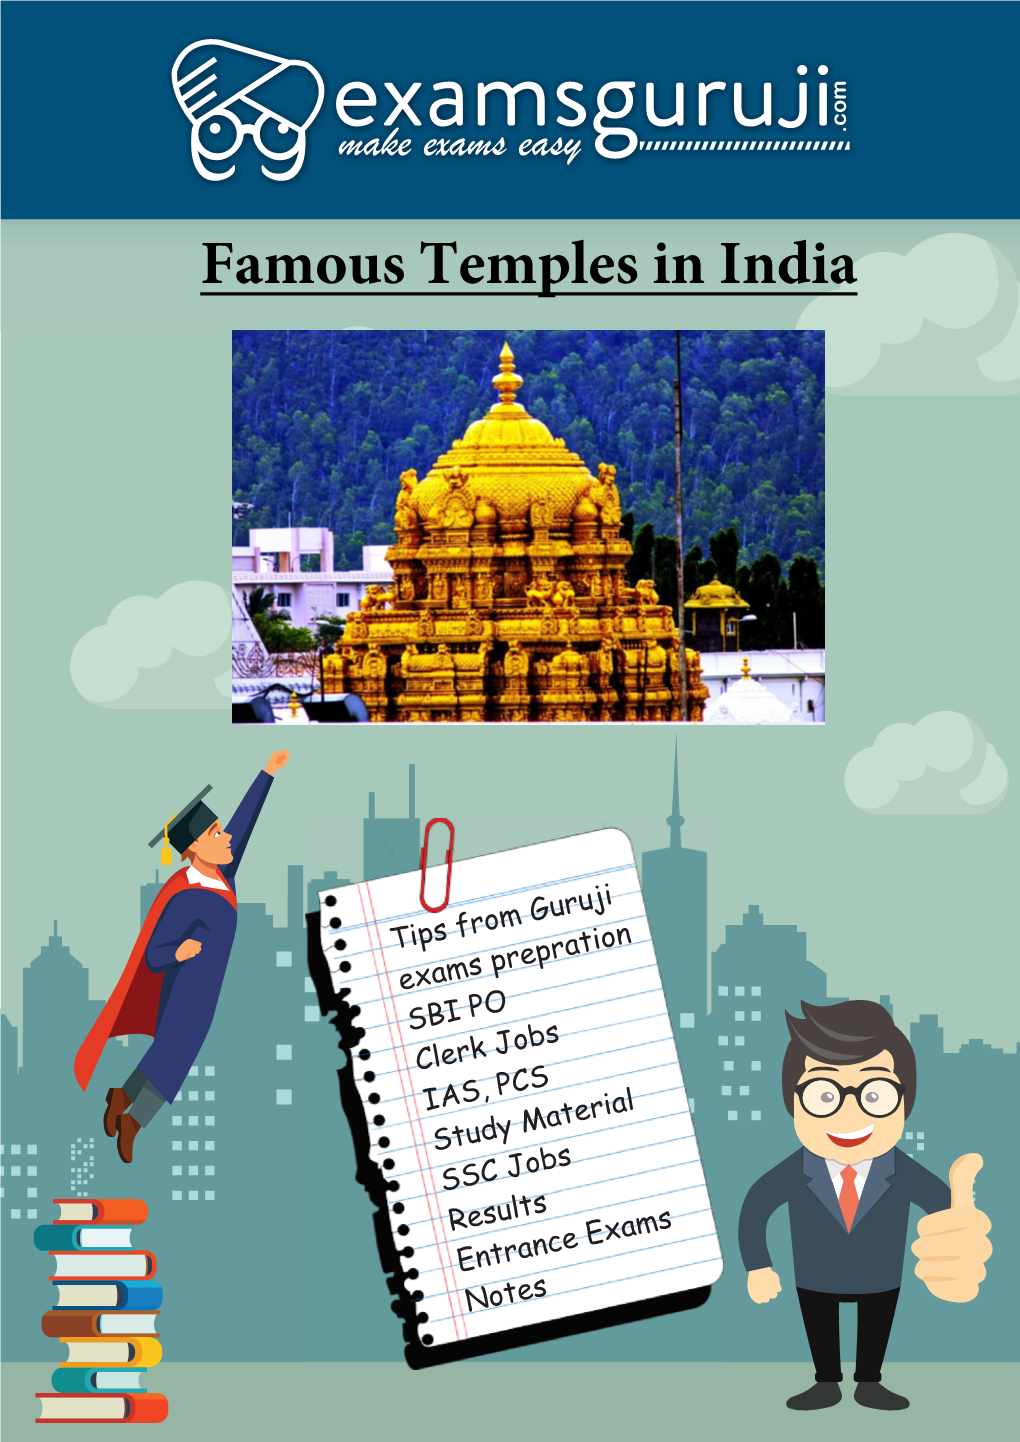 Complete List of Famous Temples/Monasteries in India